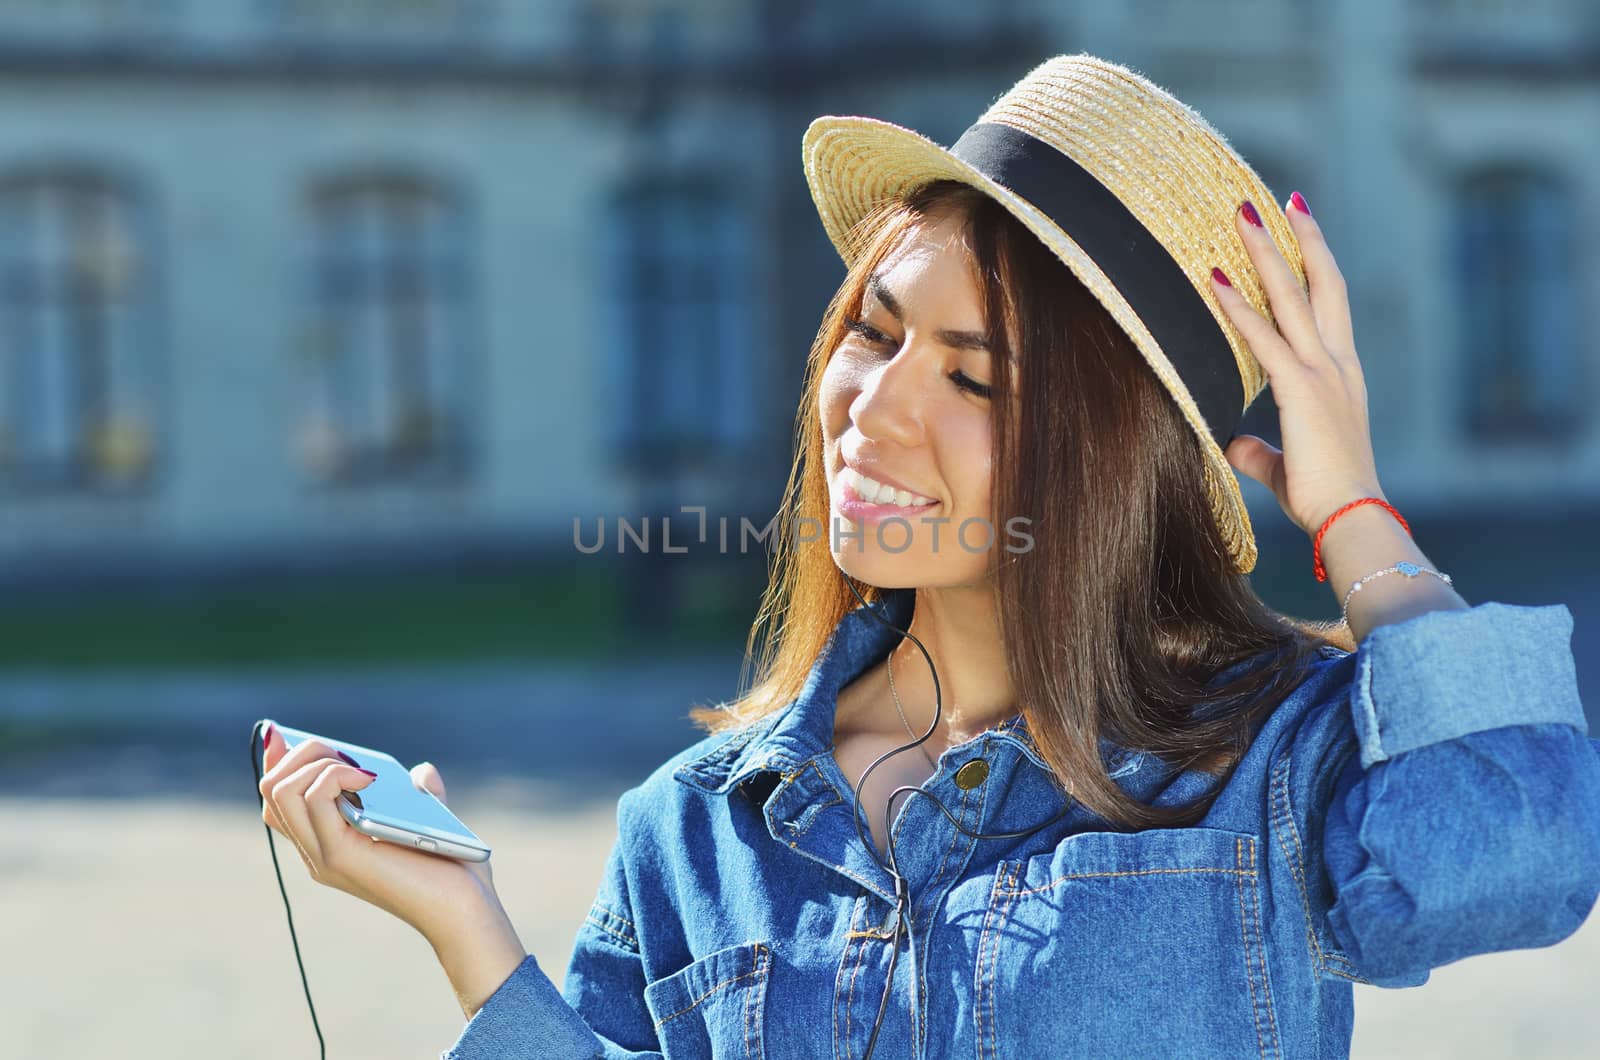 Young girl attractive appearance listening to music in the city by xzgorik